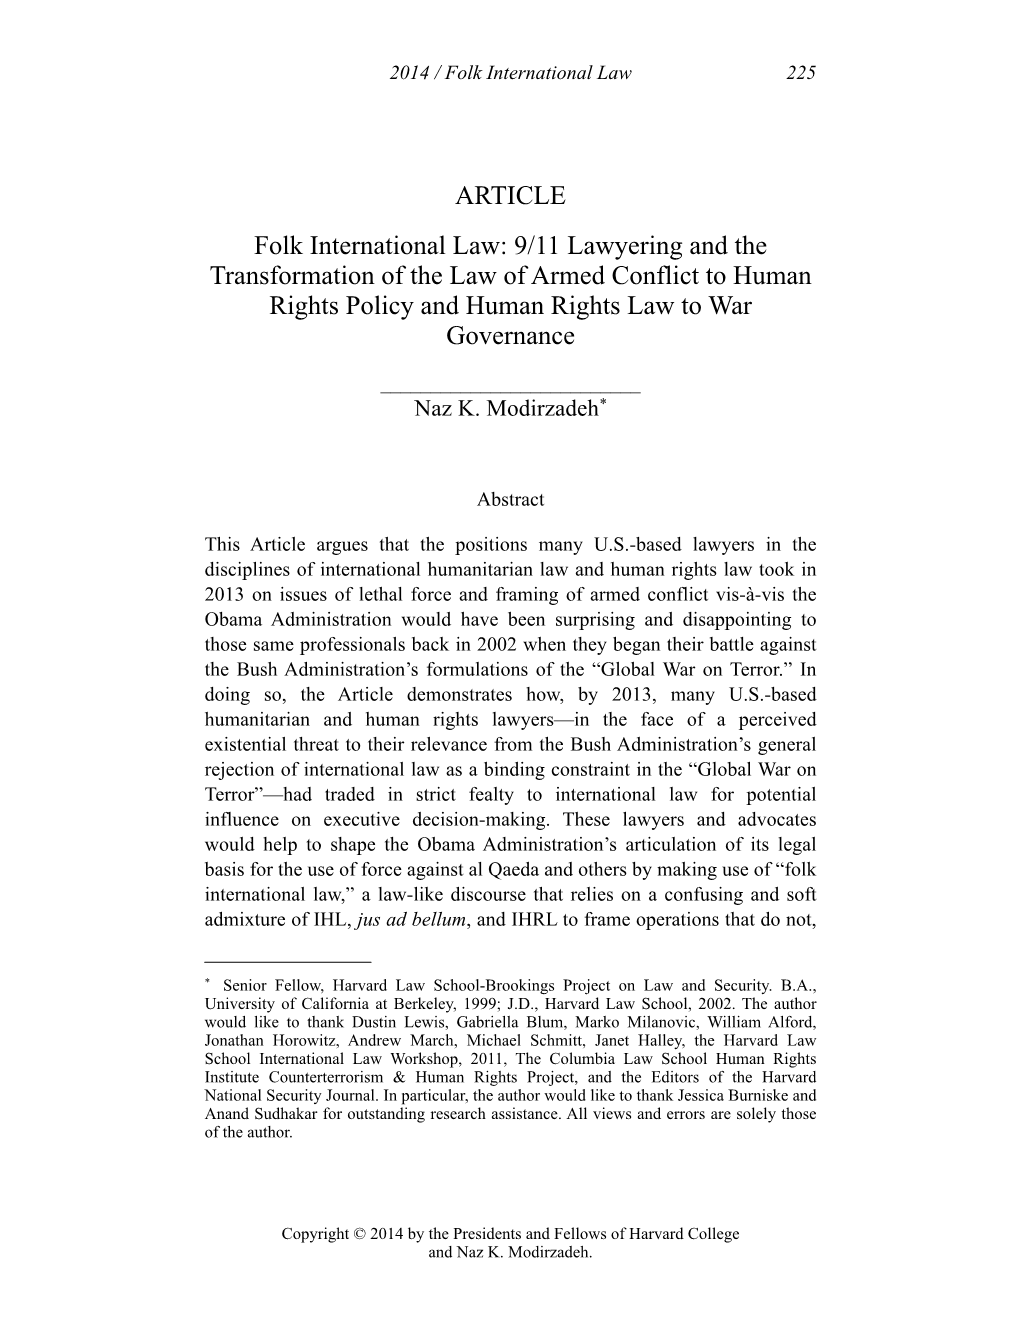 ARTICLE Folk International Law: 9/11 Lawyering and the Transformation of the Law of Armed Conflict to Human Rights Policy and Human Rights Law to War Governance